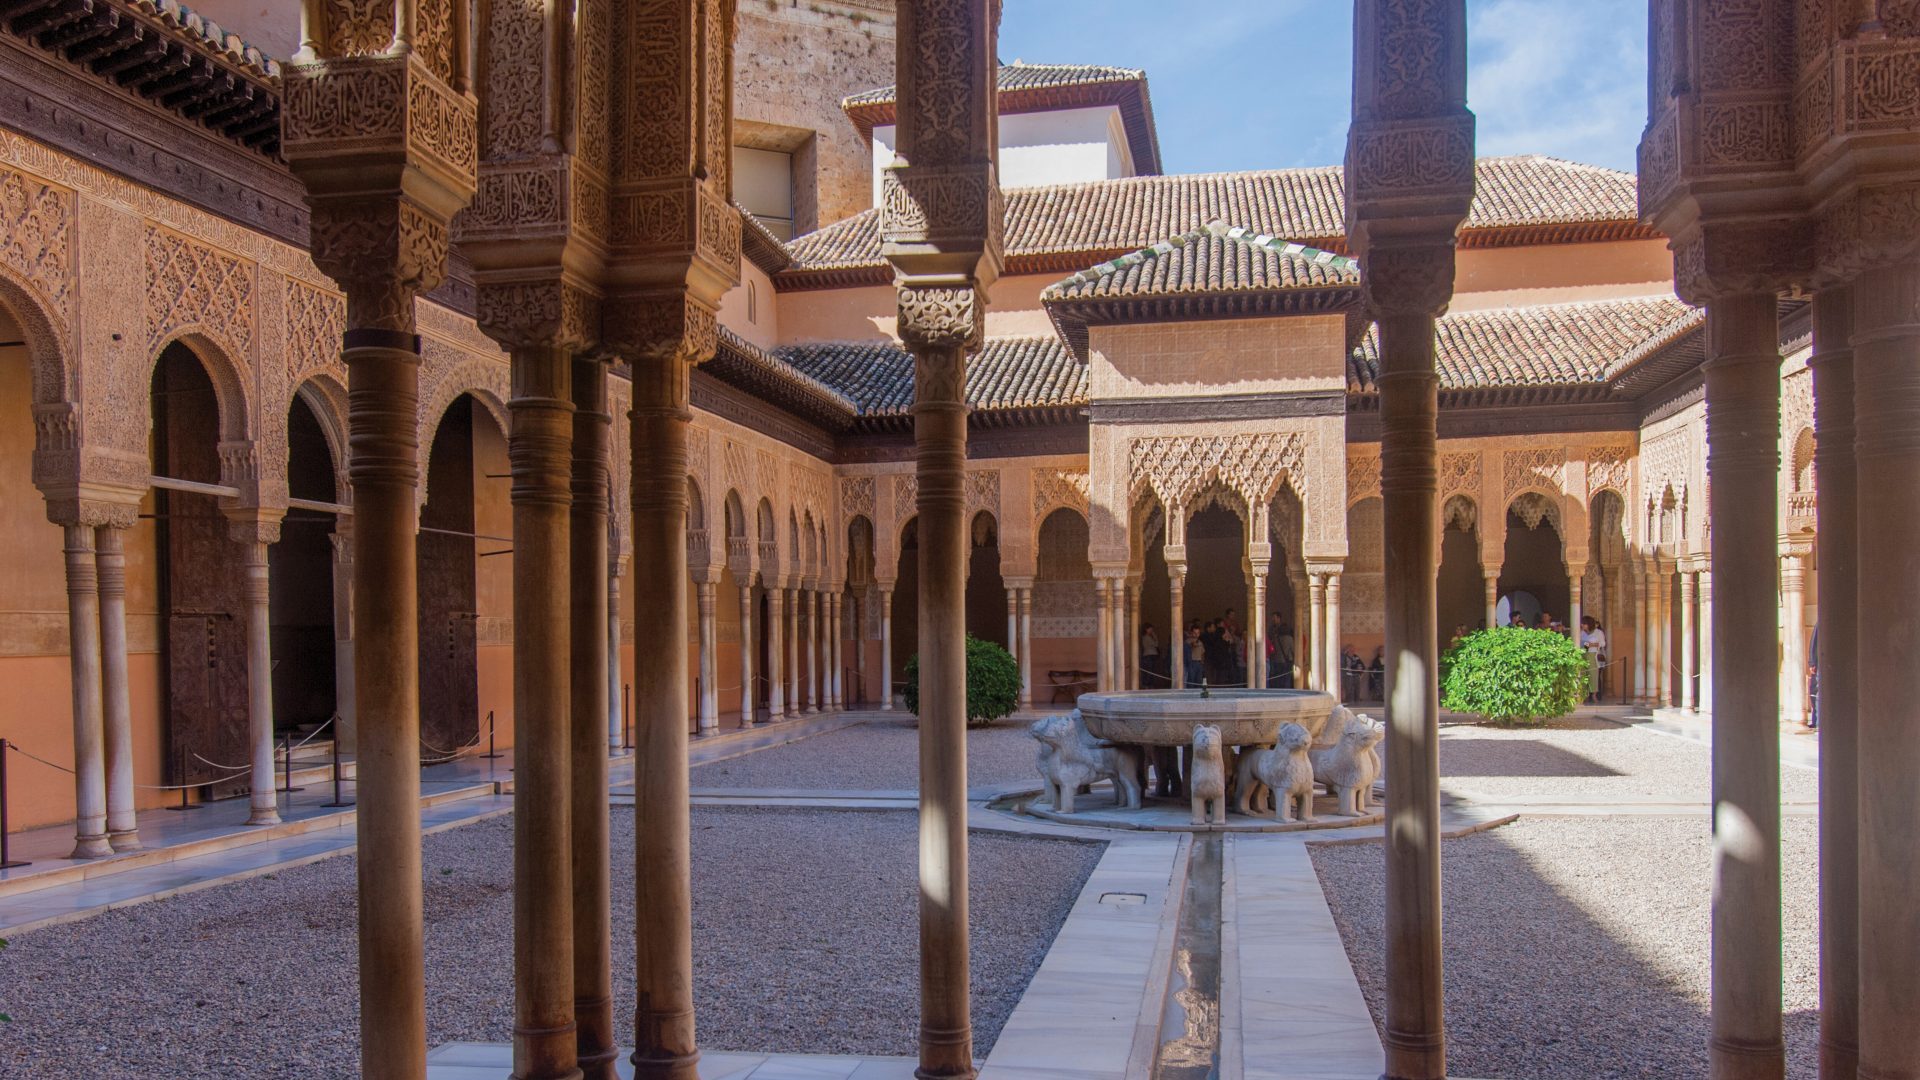 The Court of the Lions at the Alhambra in Granada, an example of Islamic Moorish architecture and garden design featuring water channels, columned galleries to create shade and white marble to reflect heat. Photo: Wolfgang Kaehler/
LightRocket/Getty